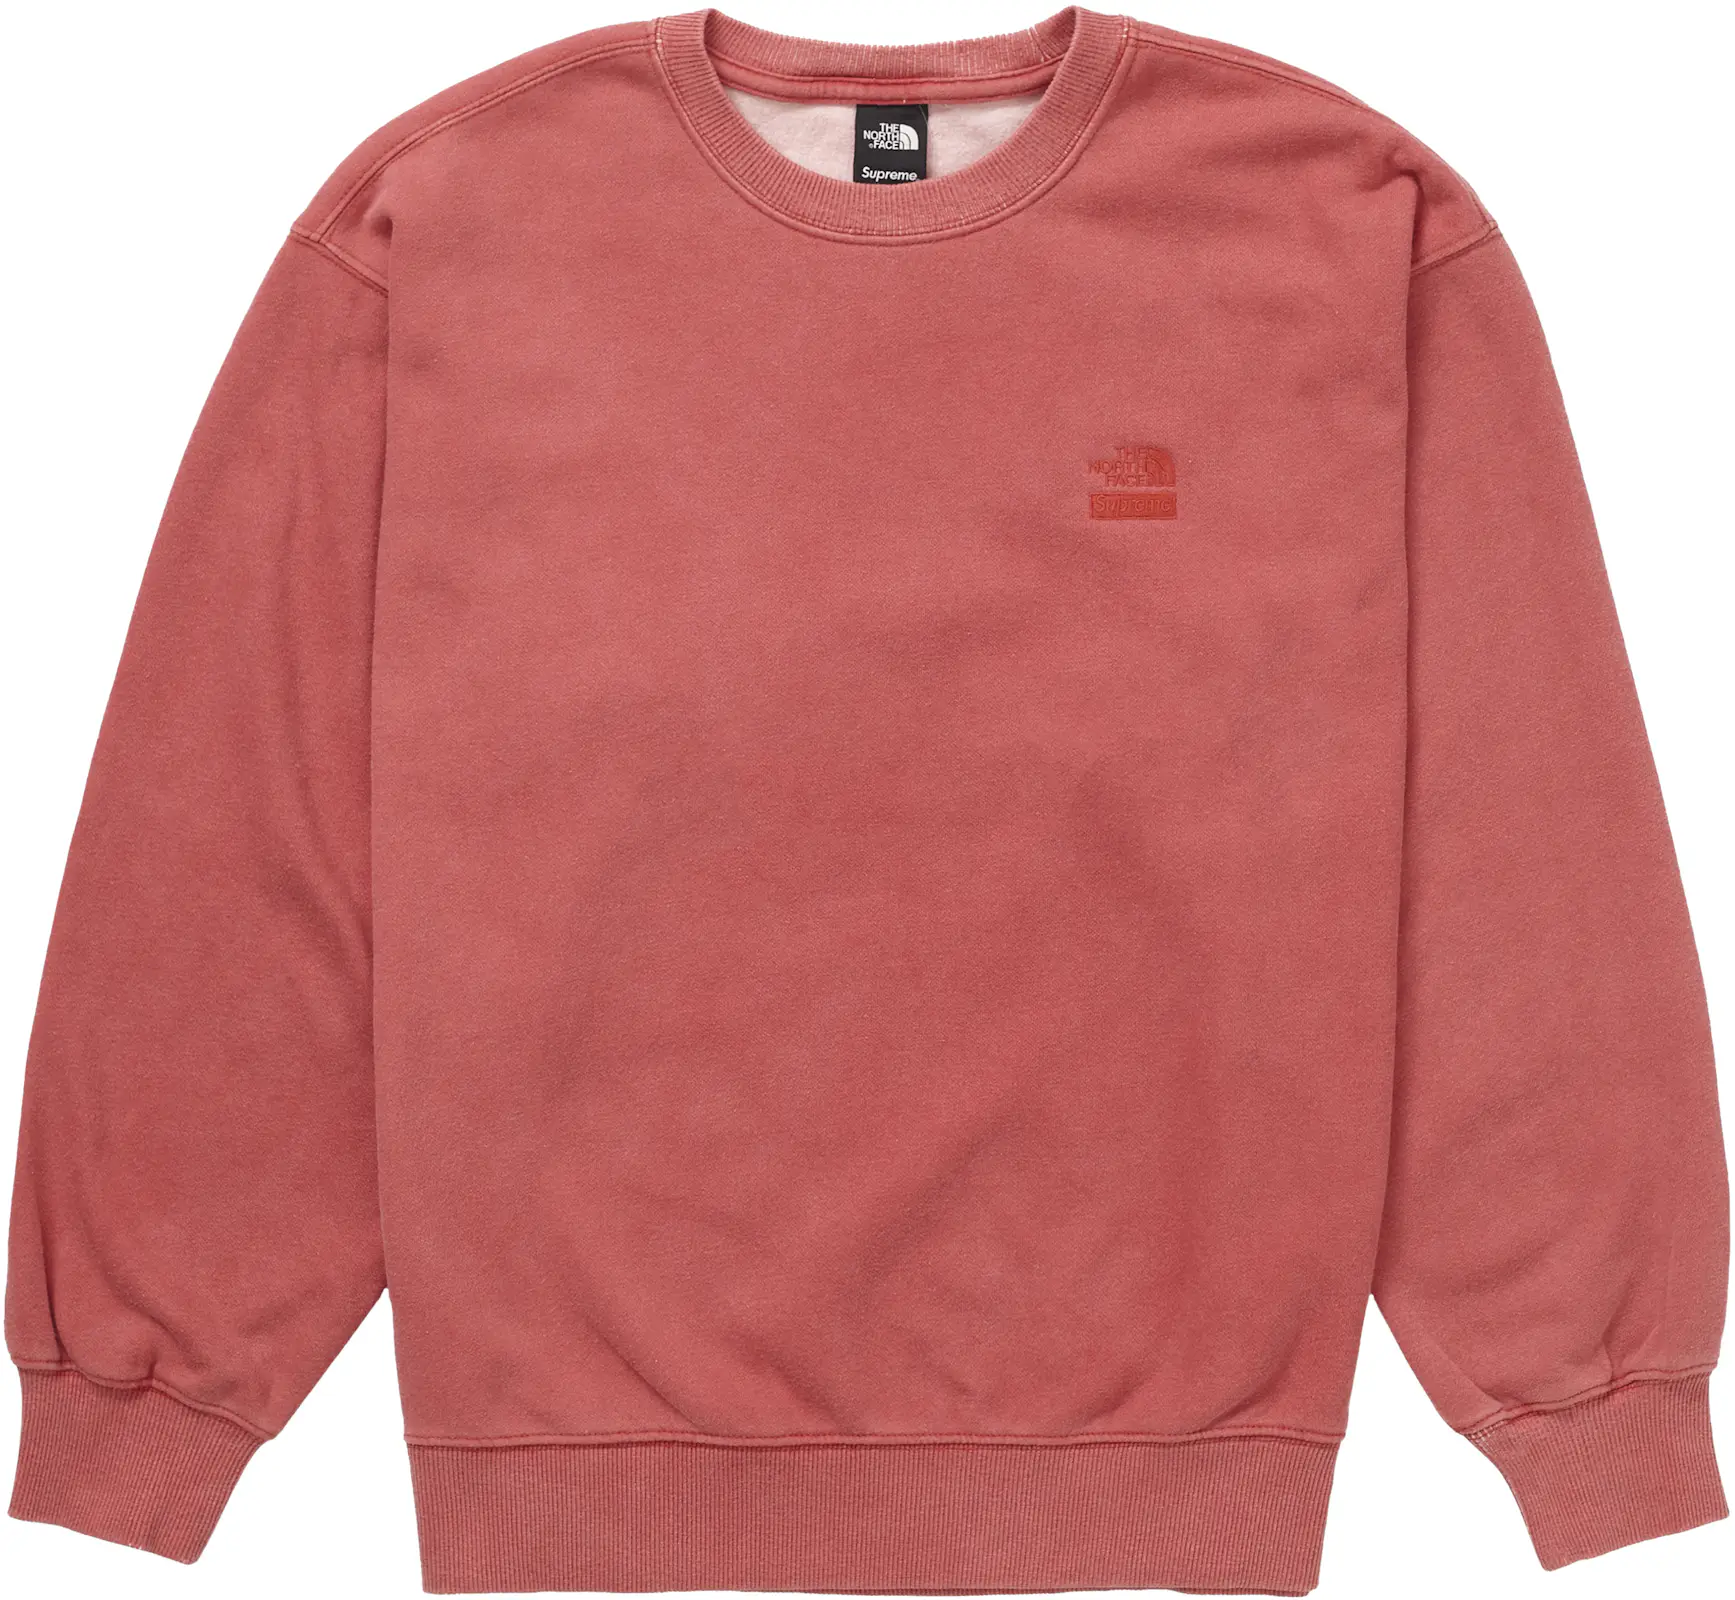 Supreme The North Face Pigment Printed Crewneck Red - SS21